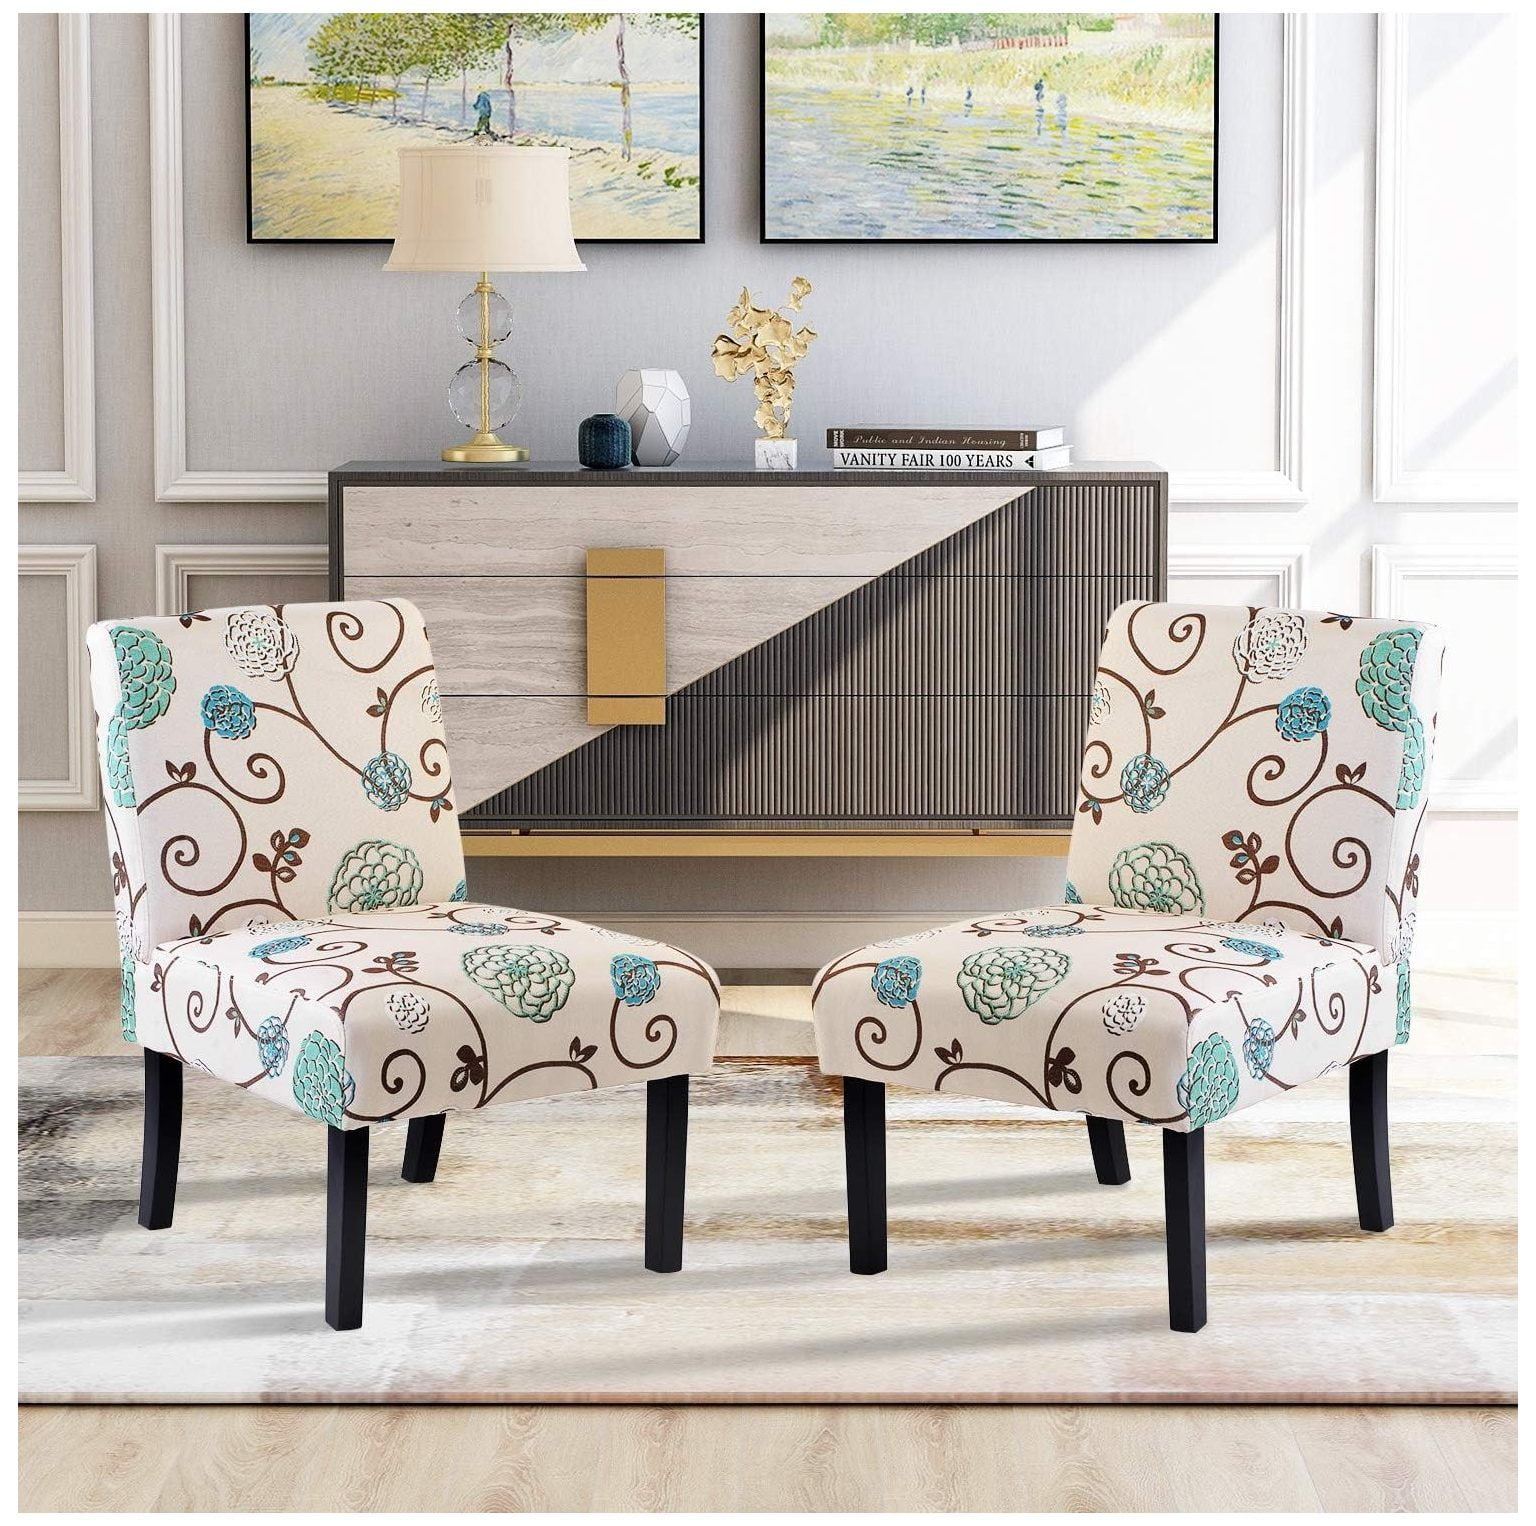 GREATYUUO Accent Chair Set Of 2 Armless Accent Chairs For Living Room Entryway Bedroom Armless Slipper Chair Set Of 2 Fabric 41b47400 42bf 4e45 Ad77 128d641e7cf7.558bb19b4820f4364909cecacf1f0dd2 